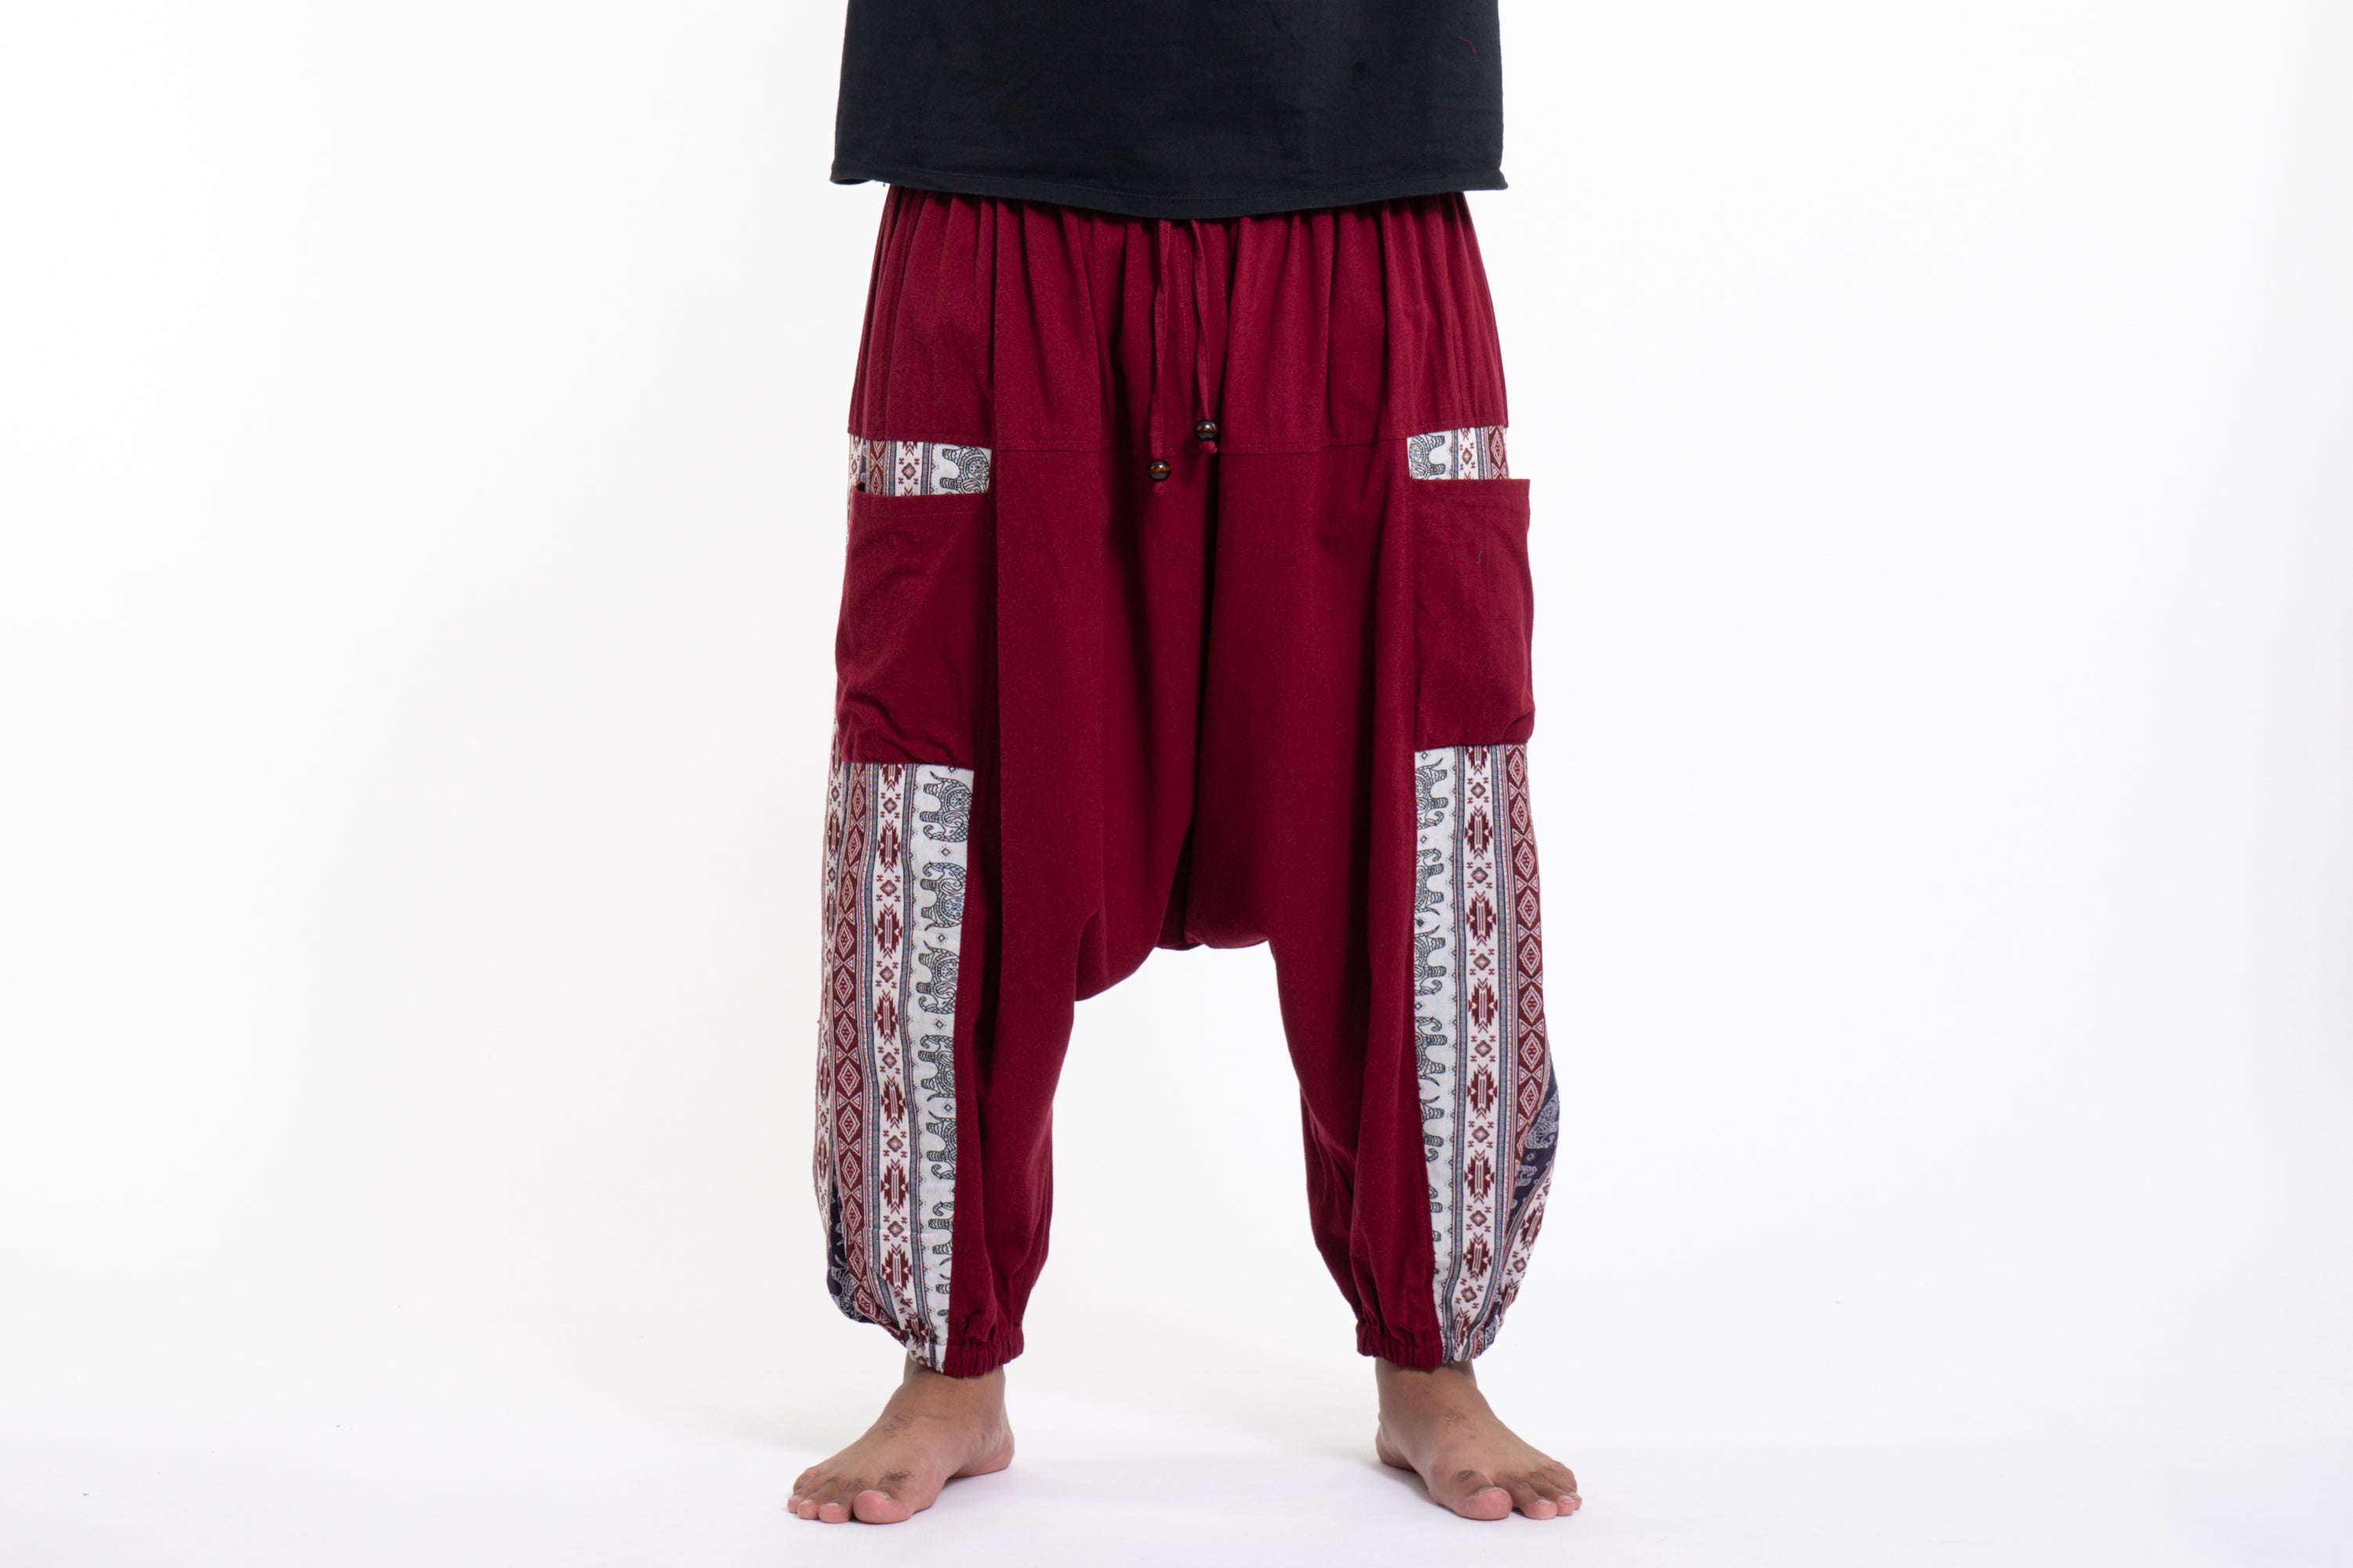 Elephant Aztec Cotton Men's Harem Pants in Navy. Free Shipping for